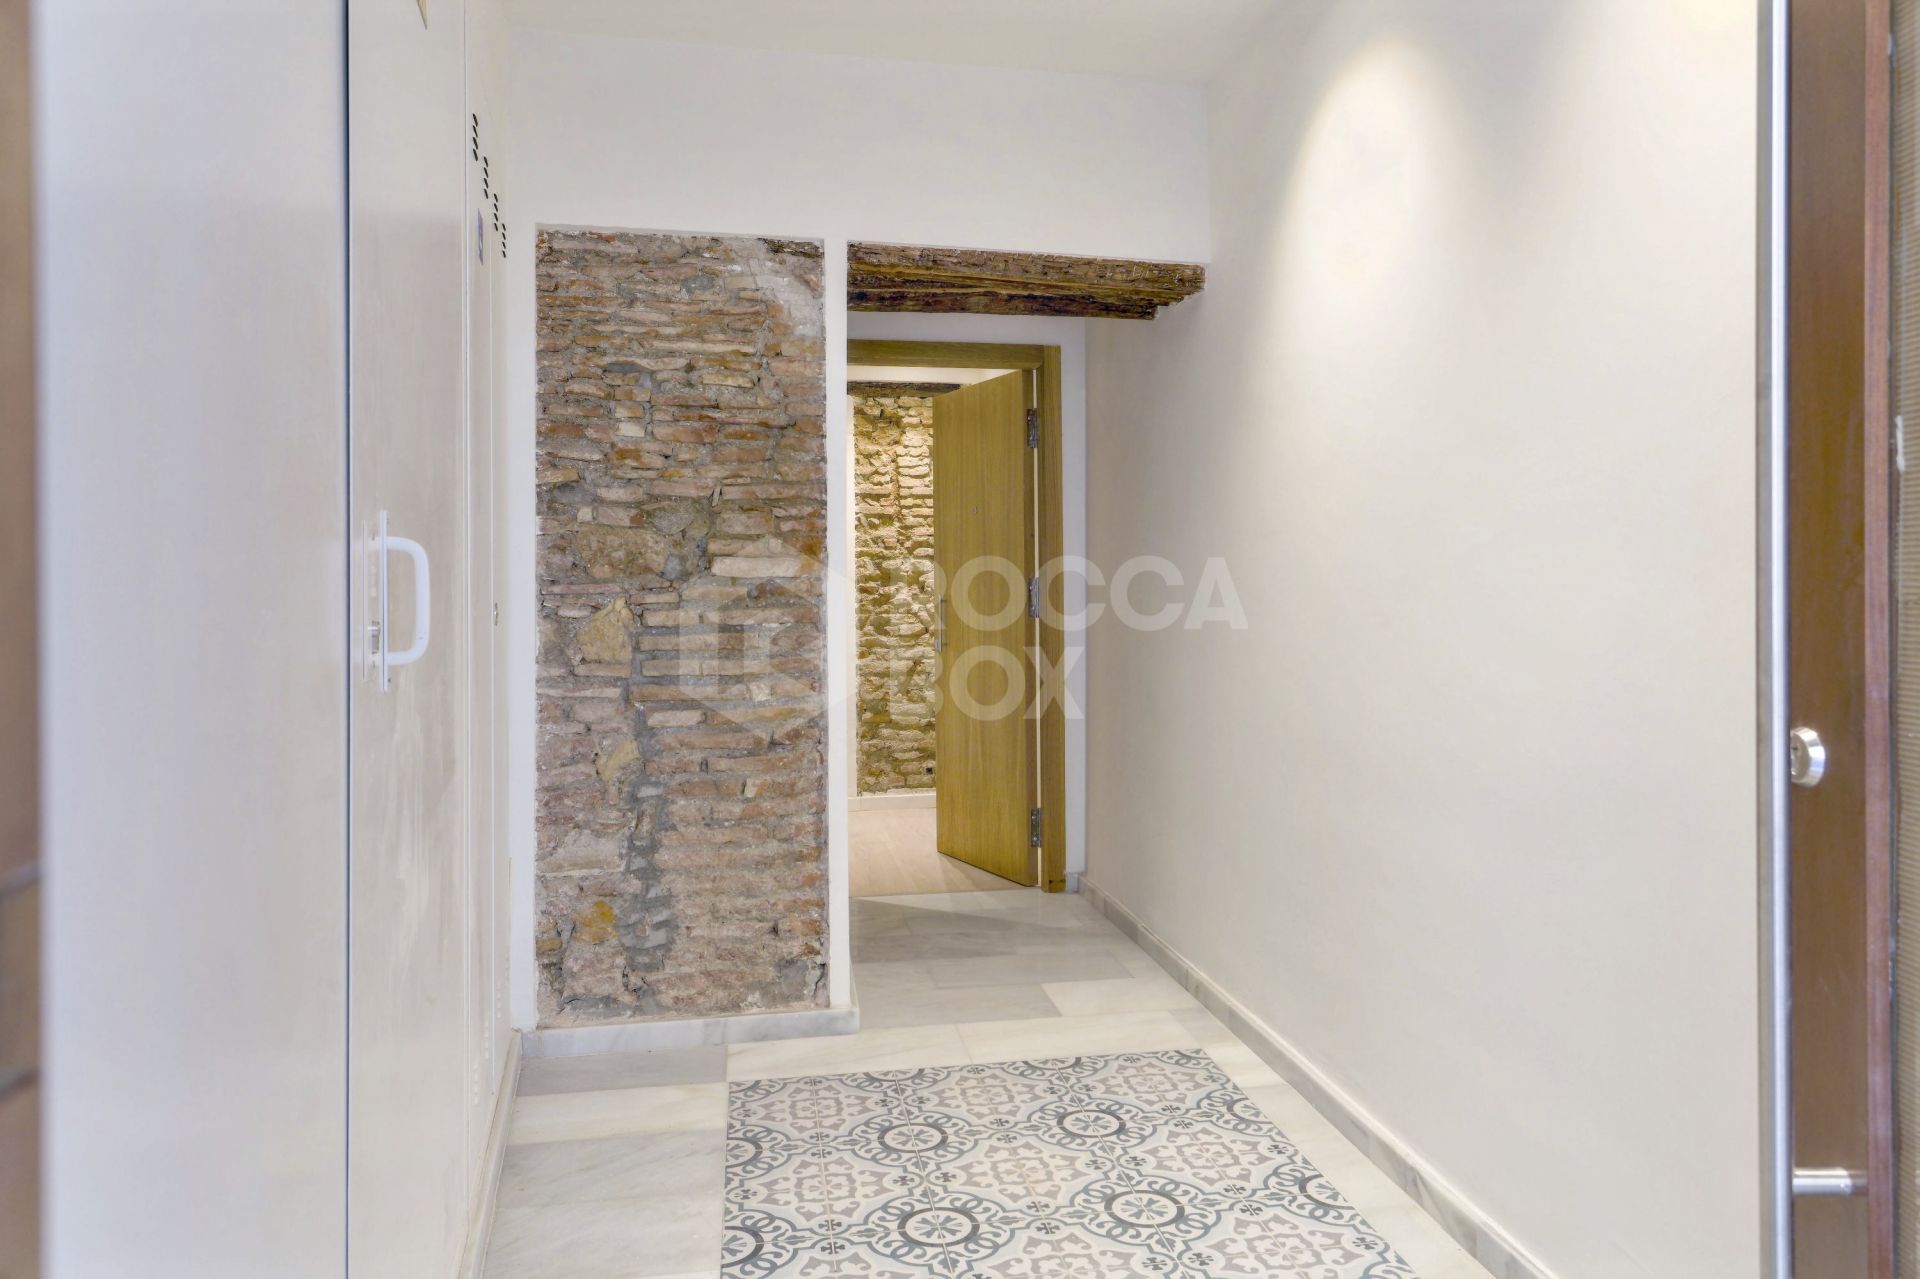 Luxury middle floor apartment in historic building with privat roof terraces on a quiet street in the historical quarters of Malaga City